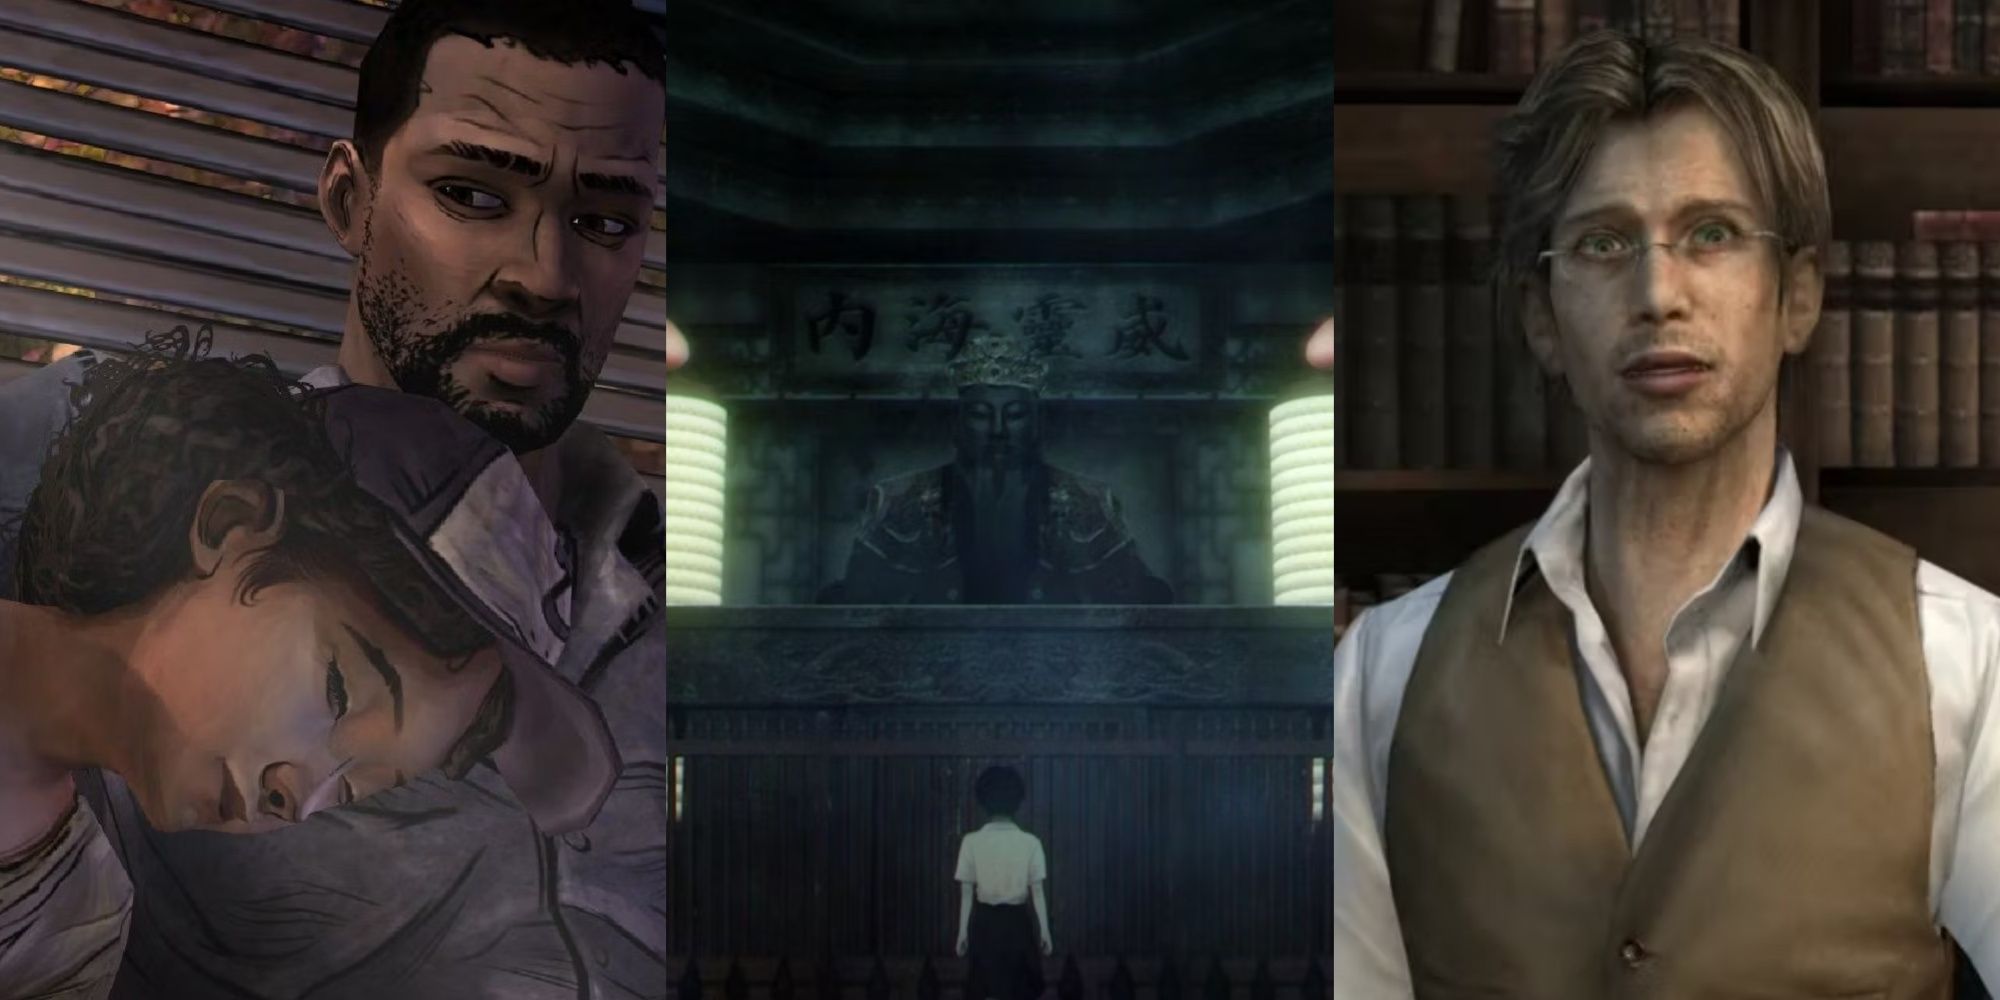 Split images of Lee and Clementine in The Walking Dead, Fang Ray Shin in Detention, and Vincent Smith in Silent Hill 3